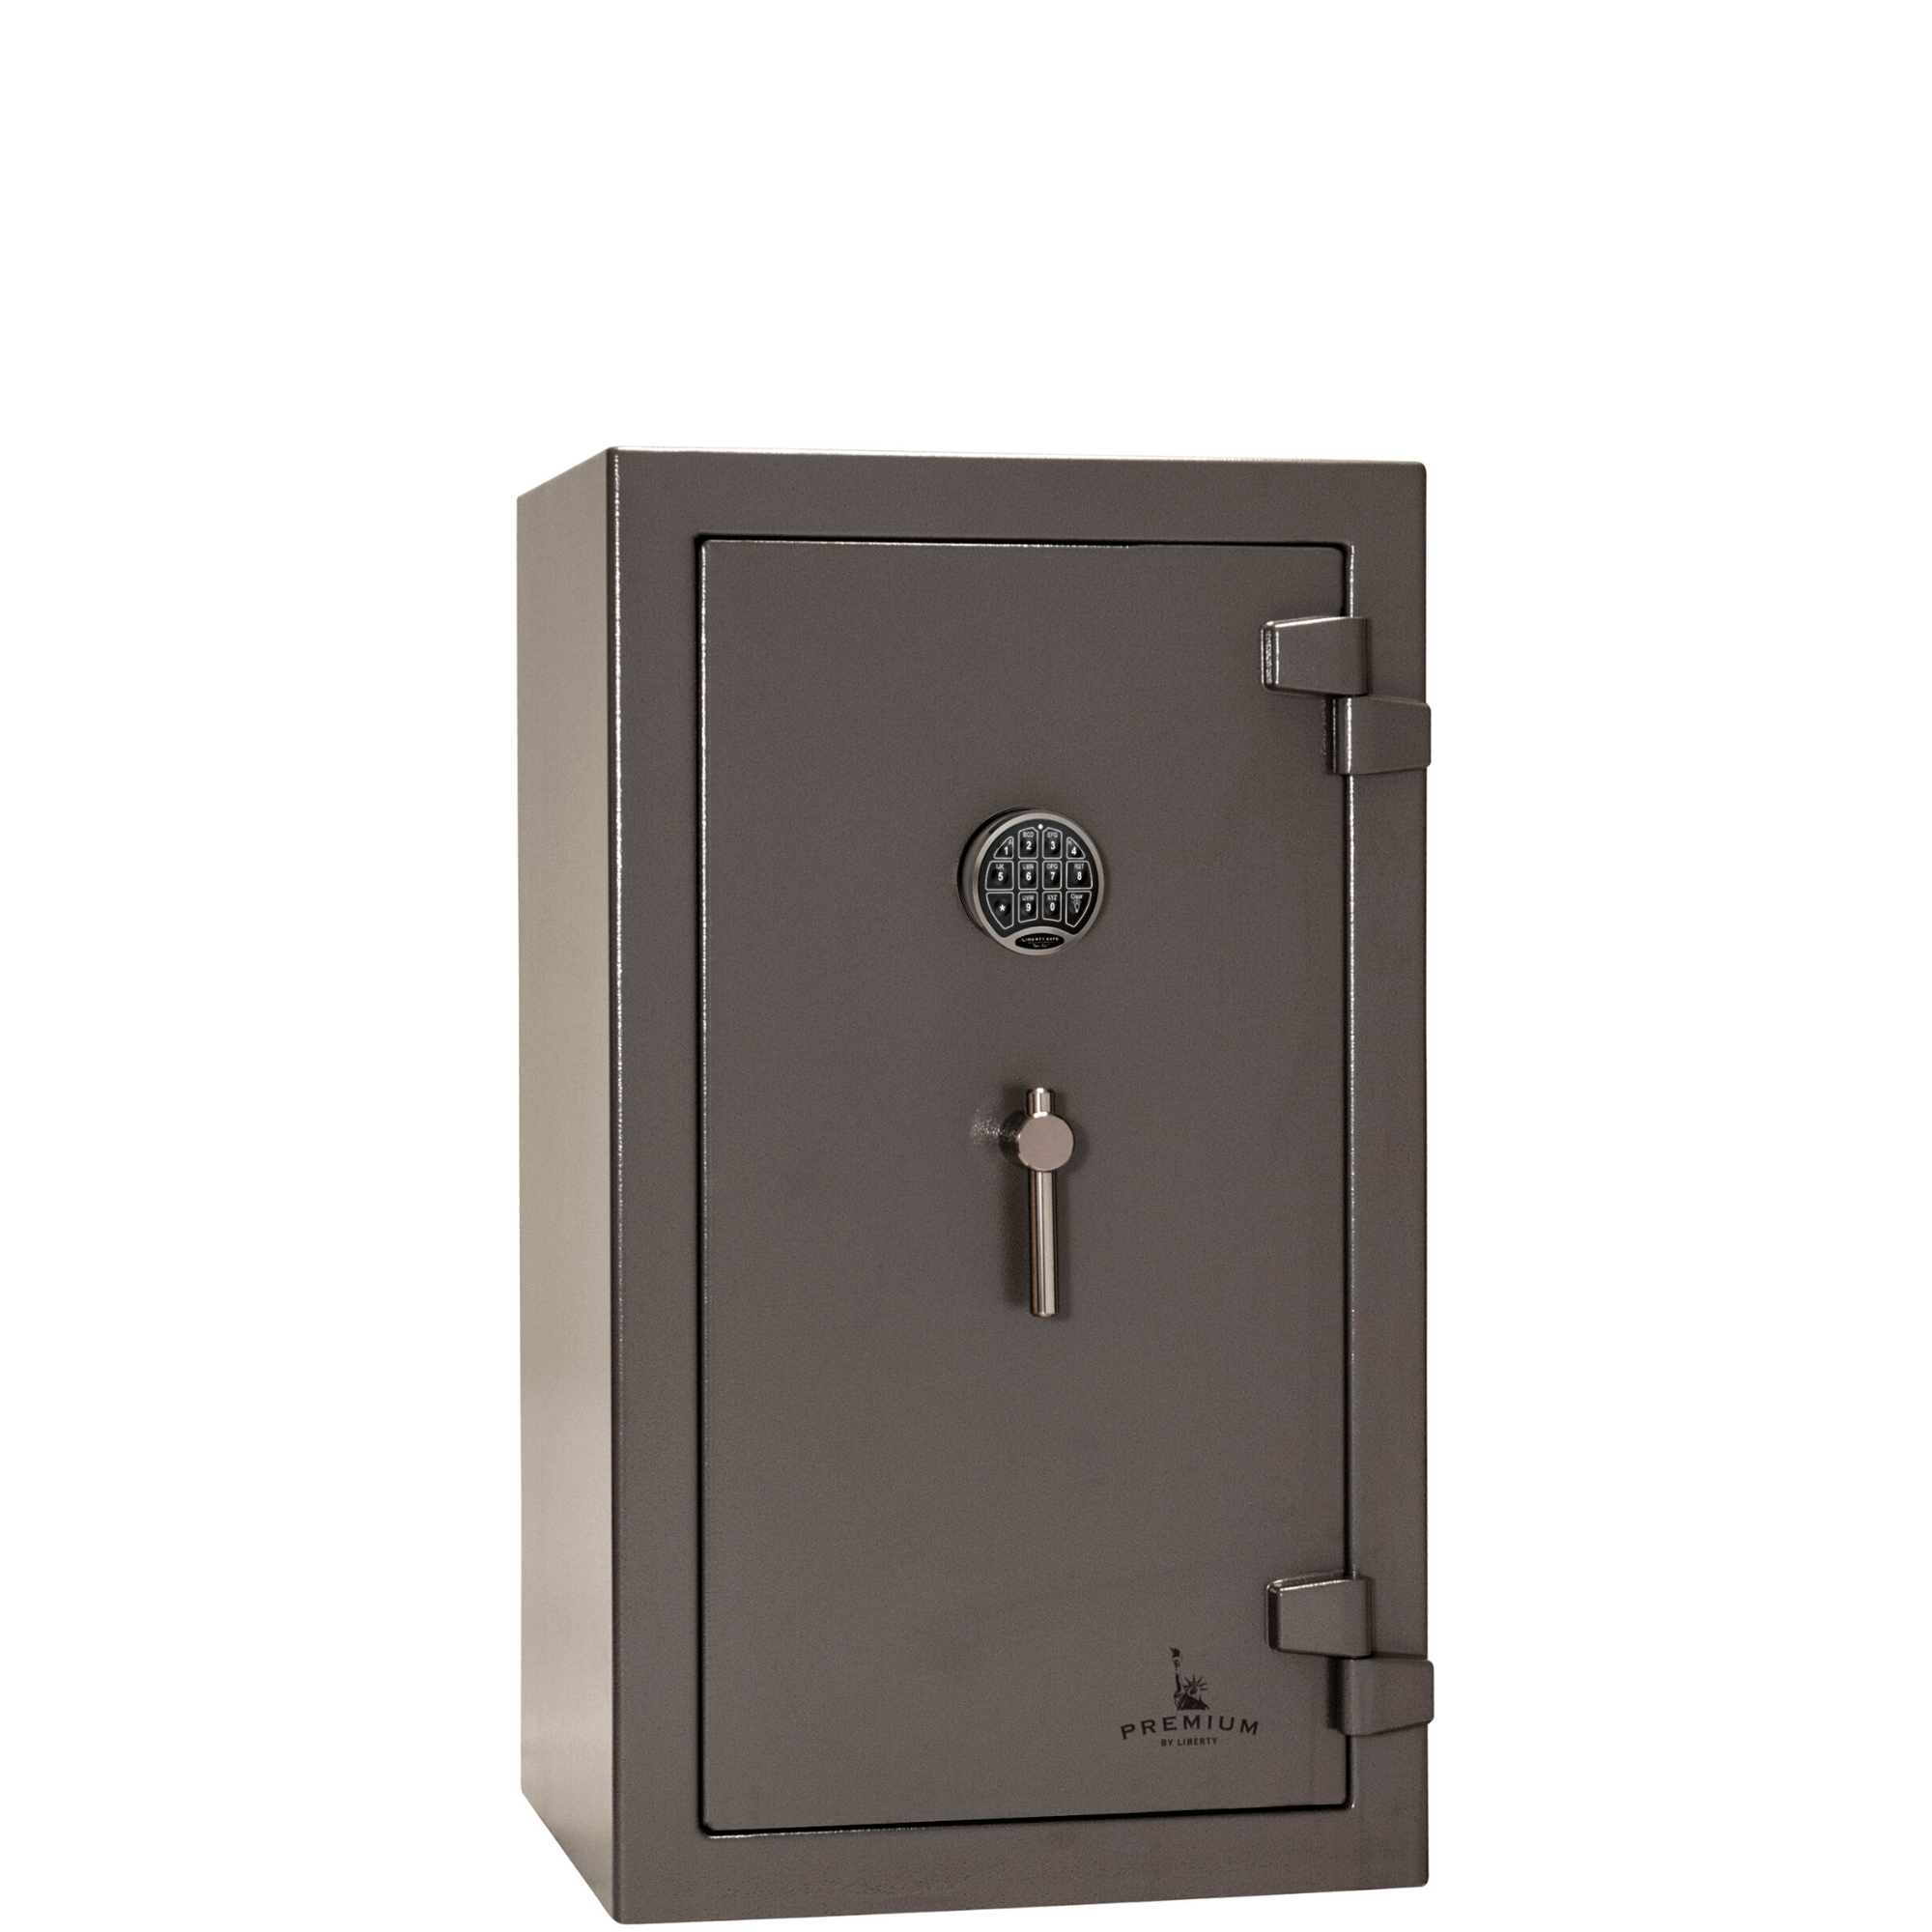 Premium Home | 12 | 90 Minute Fire Protection | Gray | Electronic Lock | Dimensions: 42"(H) x 24"(W) x 22.5"(D) | Liberty Safe Norcal.